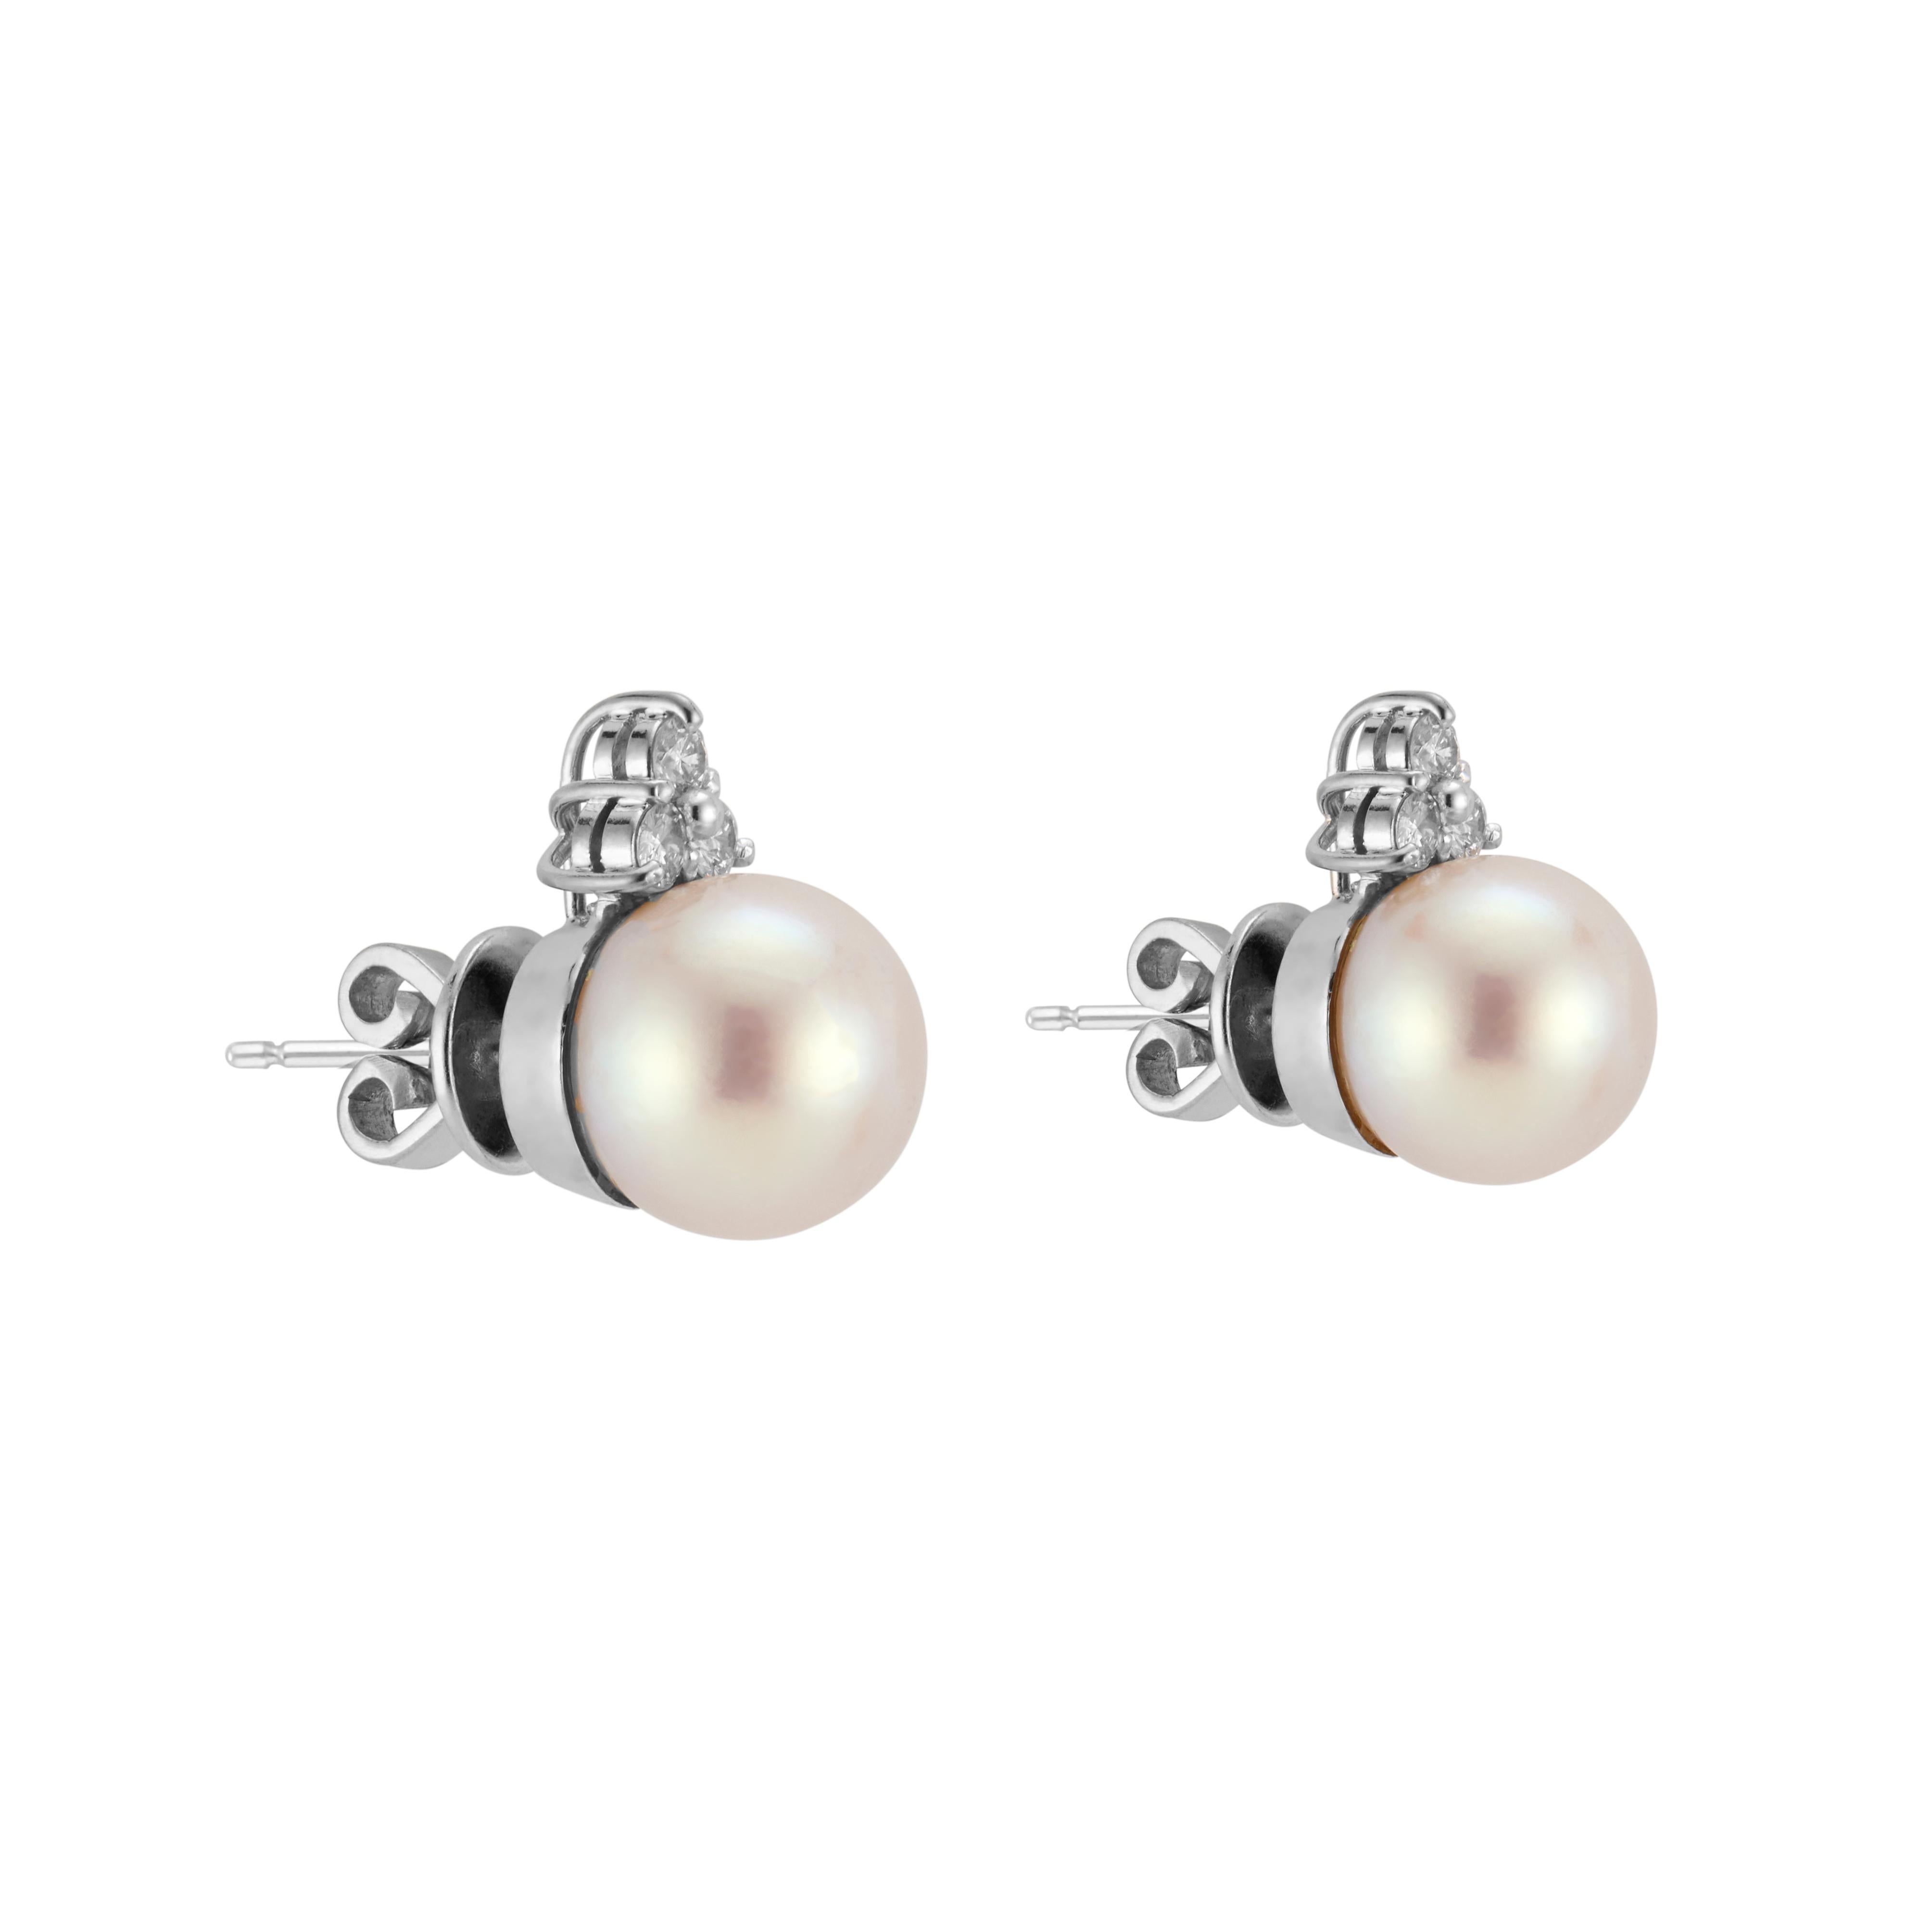 1960's Cultured pearl and diamond stud earrings. 2 Akoya pearls accented with 6 round brilliant cut diamonds in 18k white gold settings. The pearls have excellent lustre, few blemishes, cream overtone. 

2 Akoya white creme hue cultured pearls,